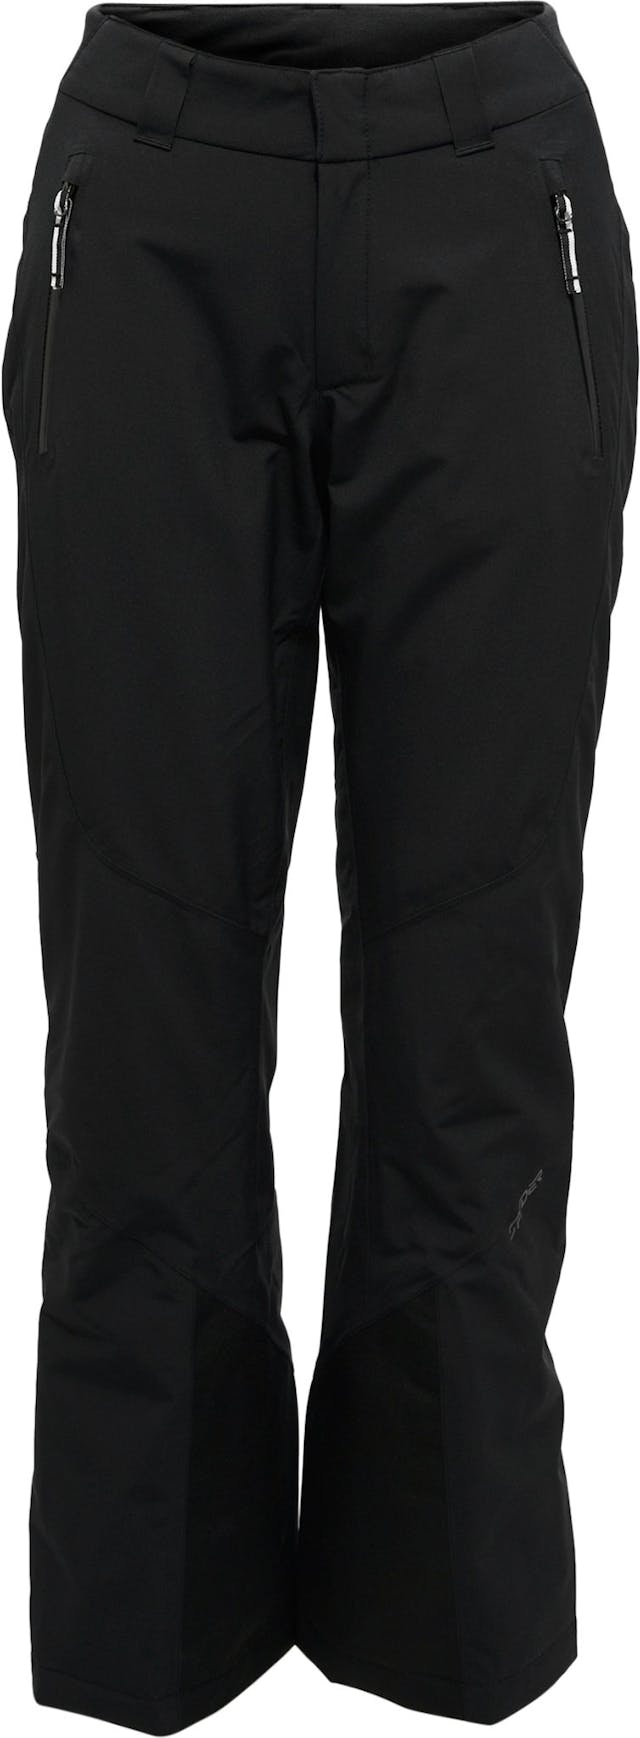 Product image for Winner Insulated Pants - Women's